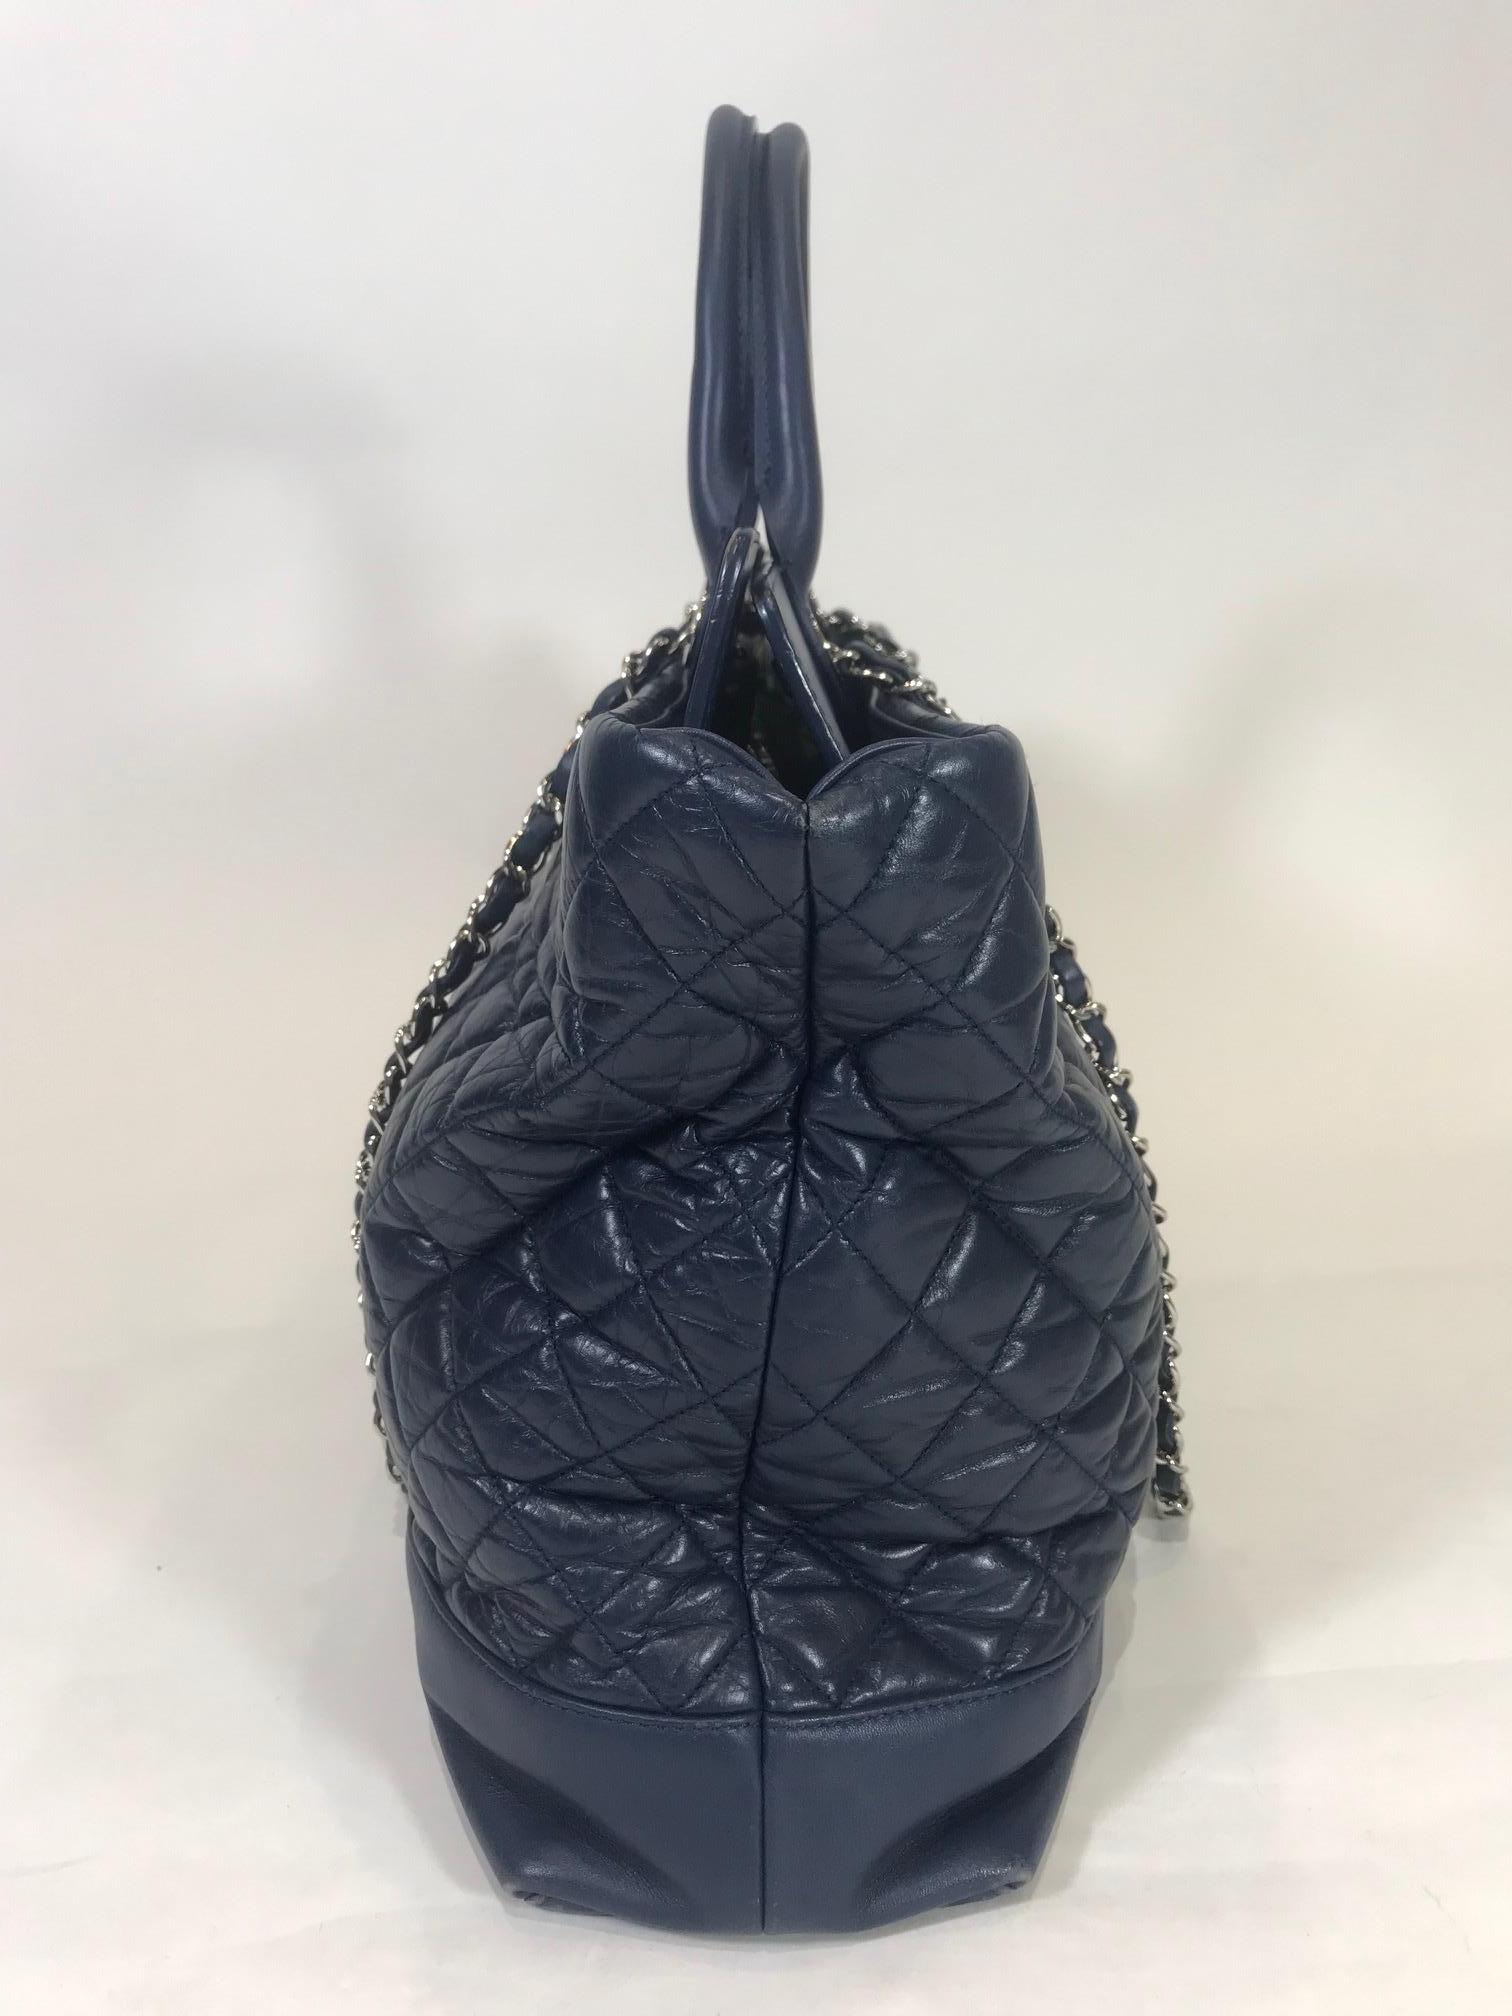 Navy blue quilted calfskin leather. Silver-tone hardware. Turn-lock closure at top. Dual woven chain-link shoulder straps with leather shoulder guard. 